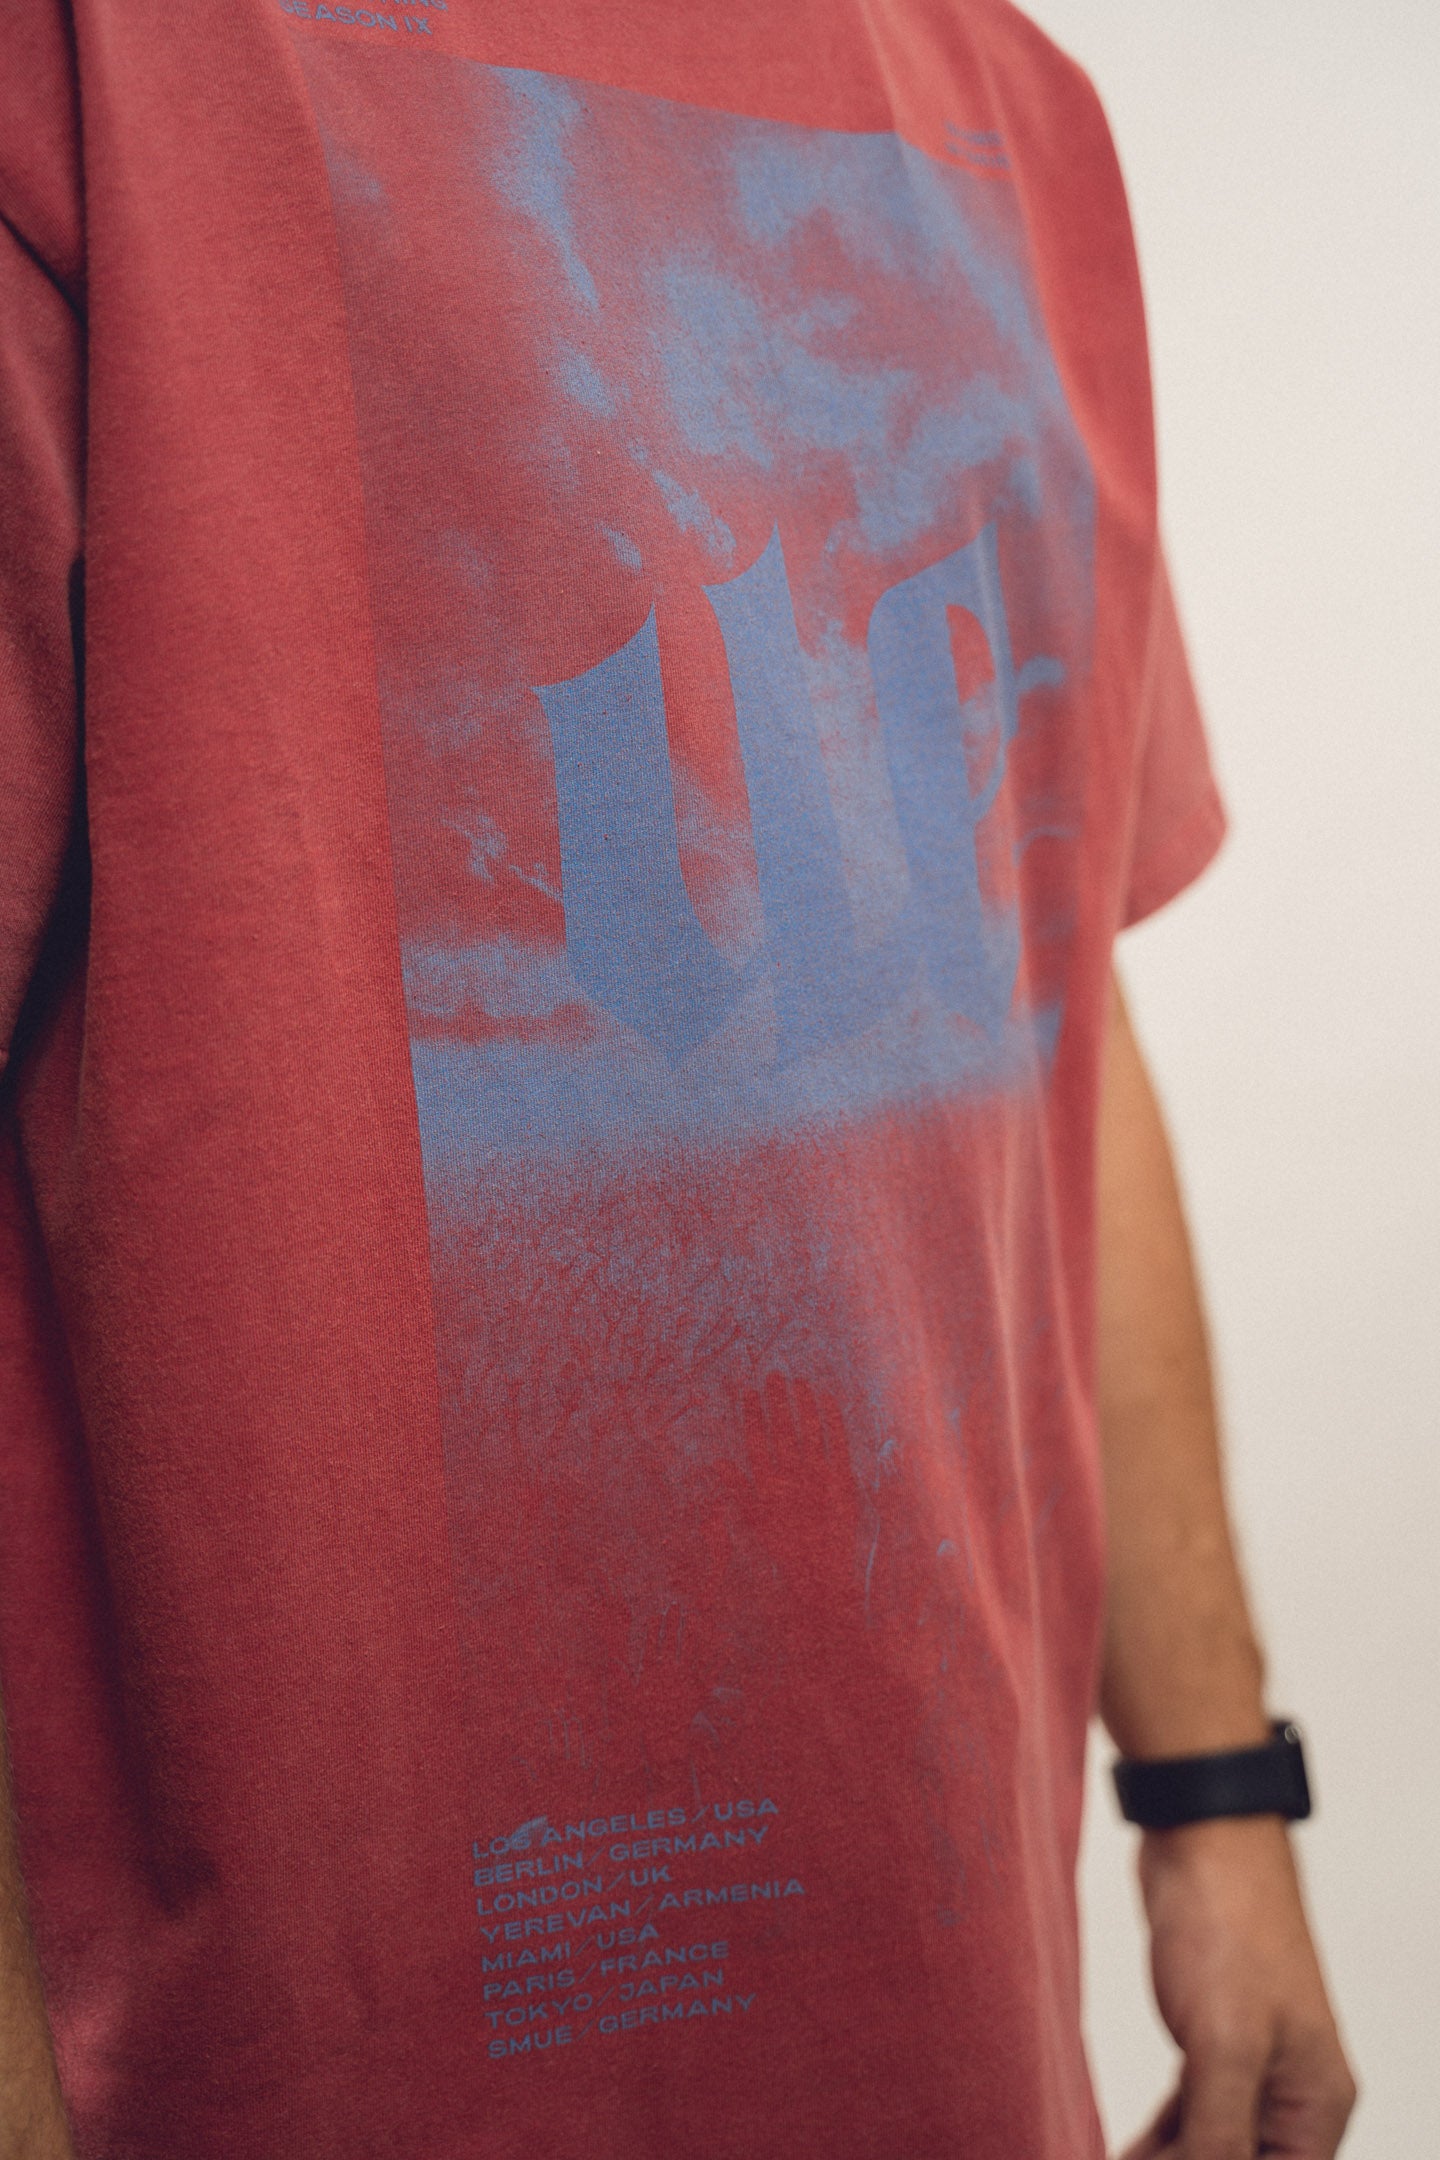 Shirt "uenlimited" washed red